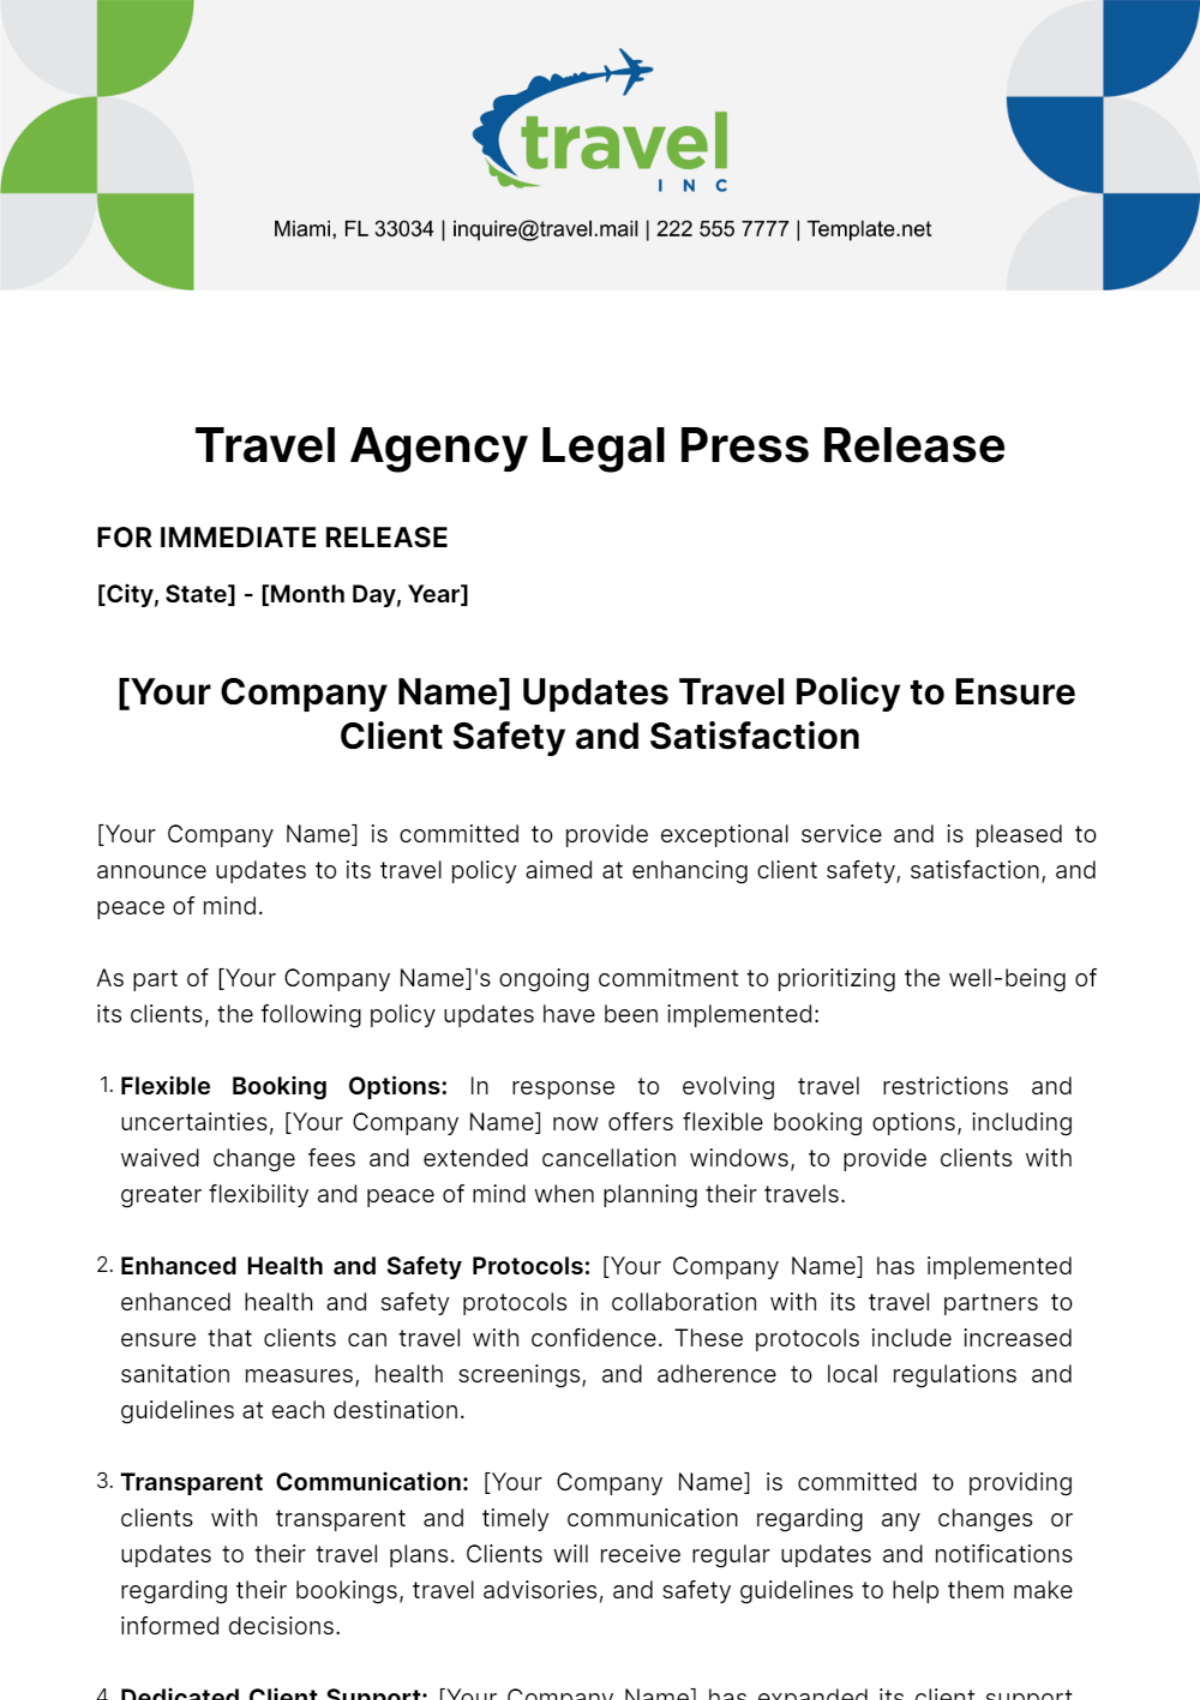 Travel Agency Legal Press Release Template